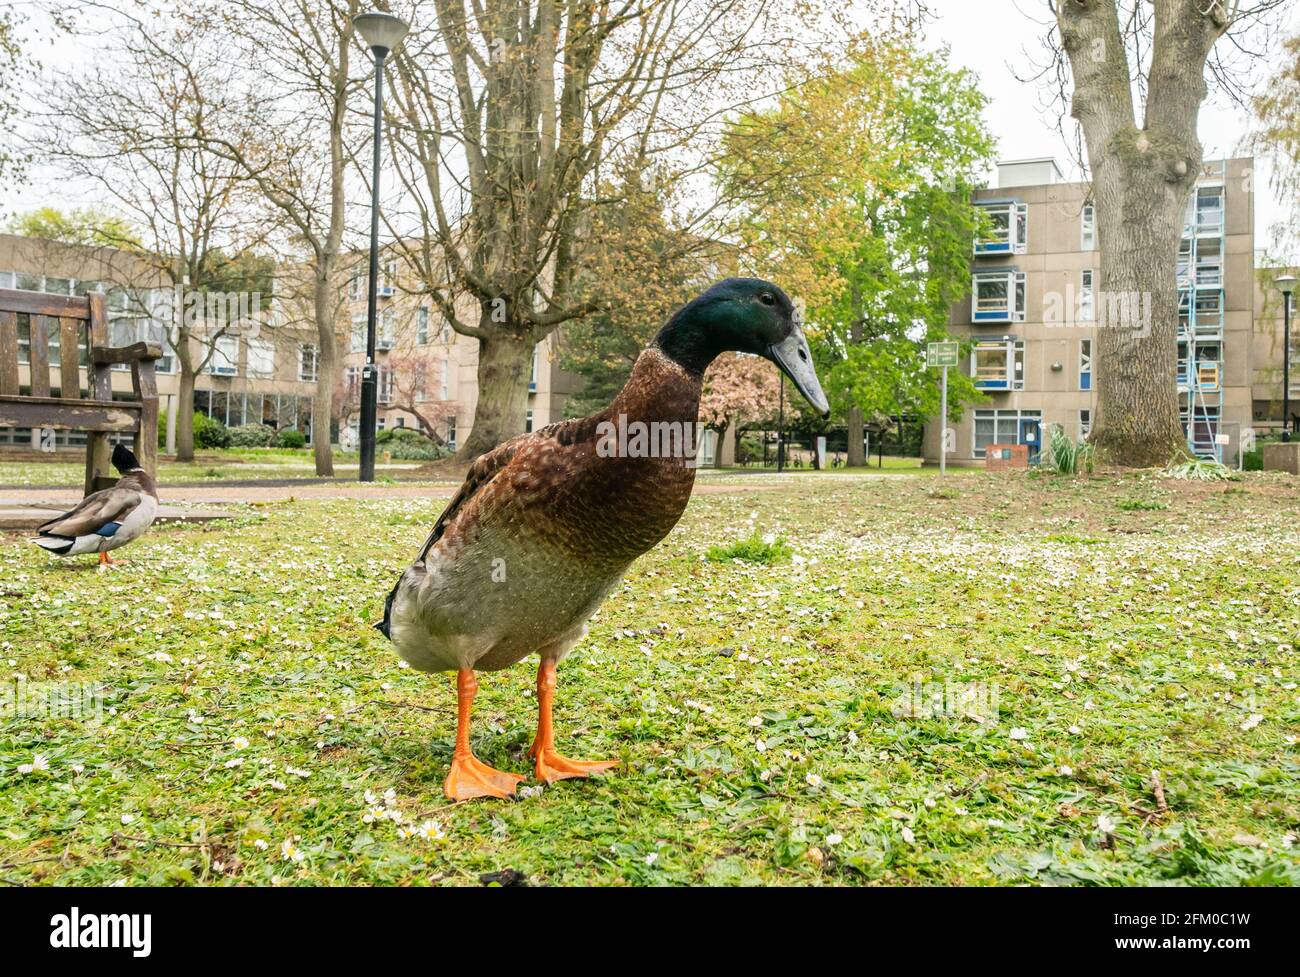 York university campus duck named Long Boi, who went viral due to his impressive stature. It is believed that the very large duck is a cross between a Mallard and an Indian Runner duck. Picture date: Monday May 3, 2021. Stock Photo